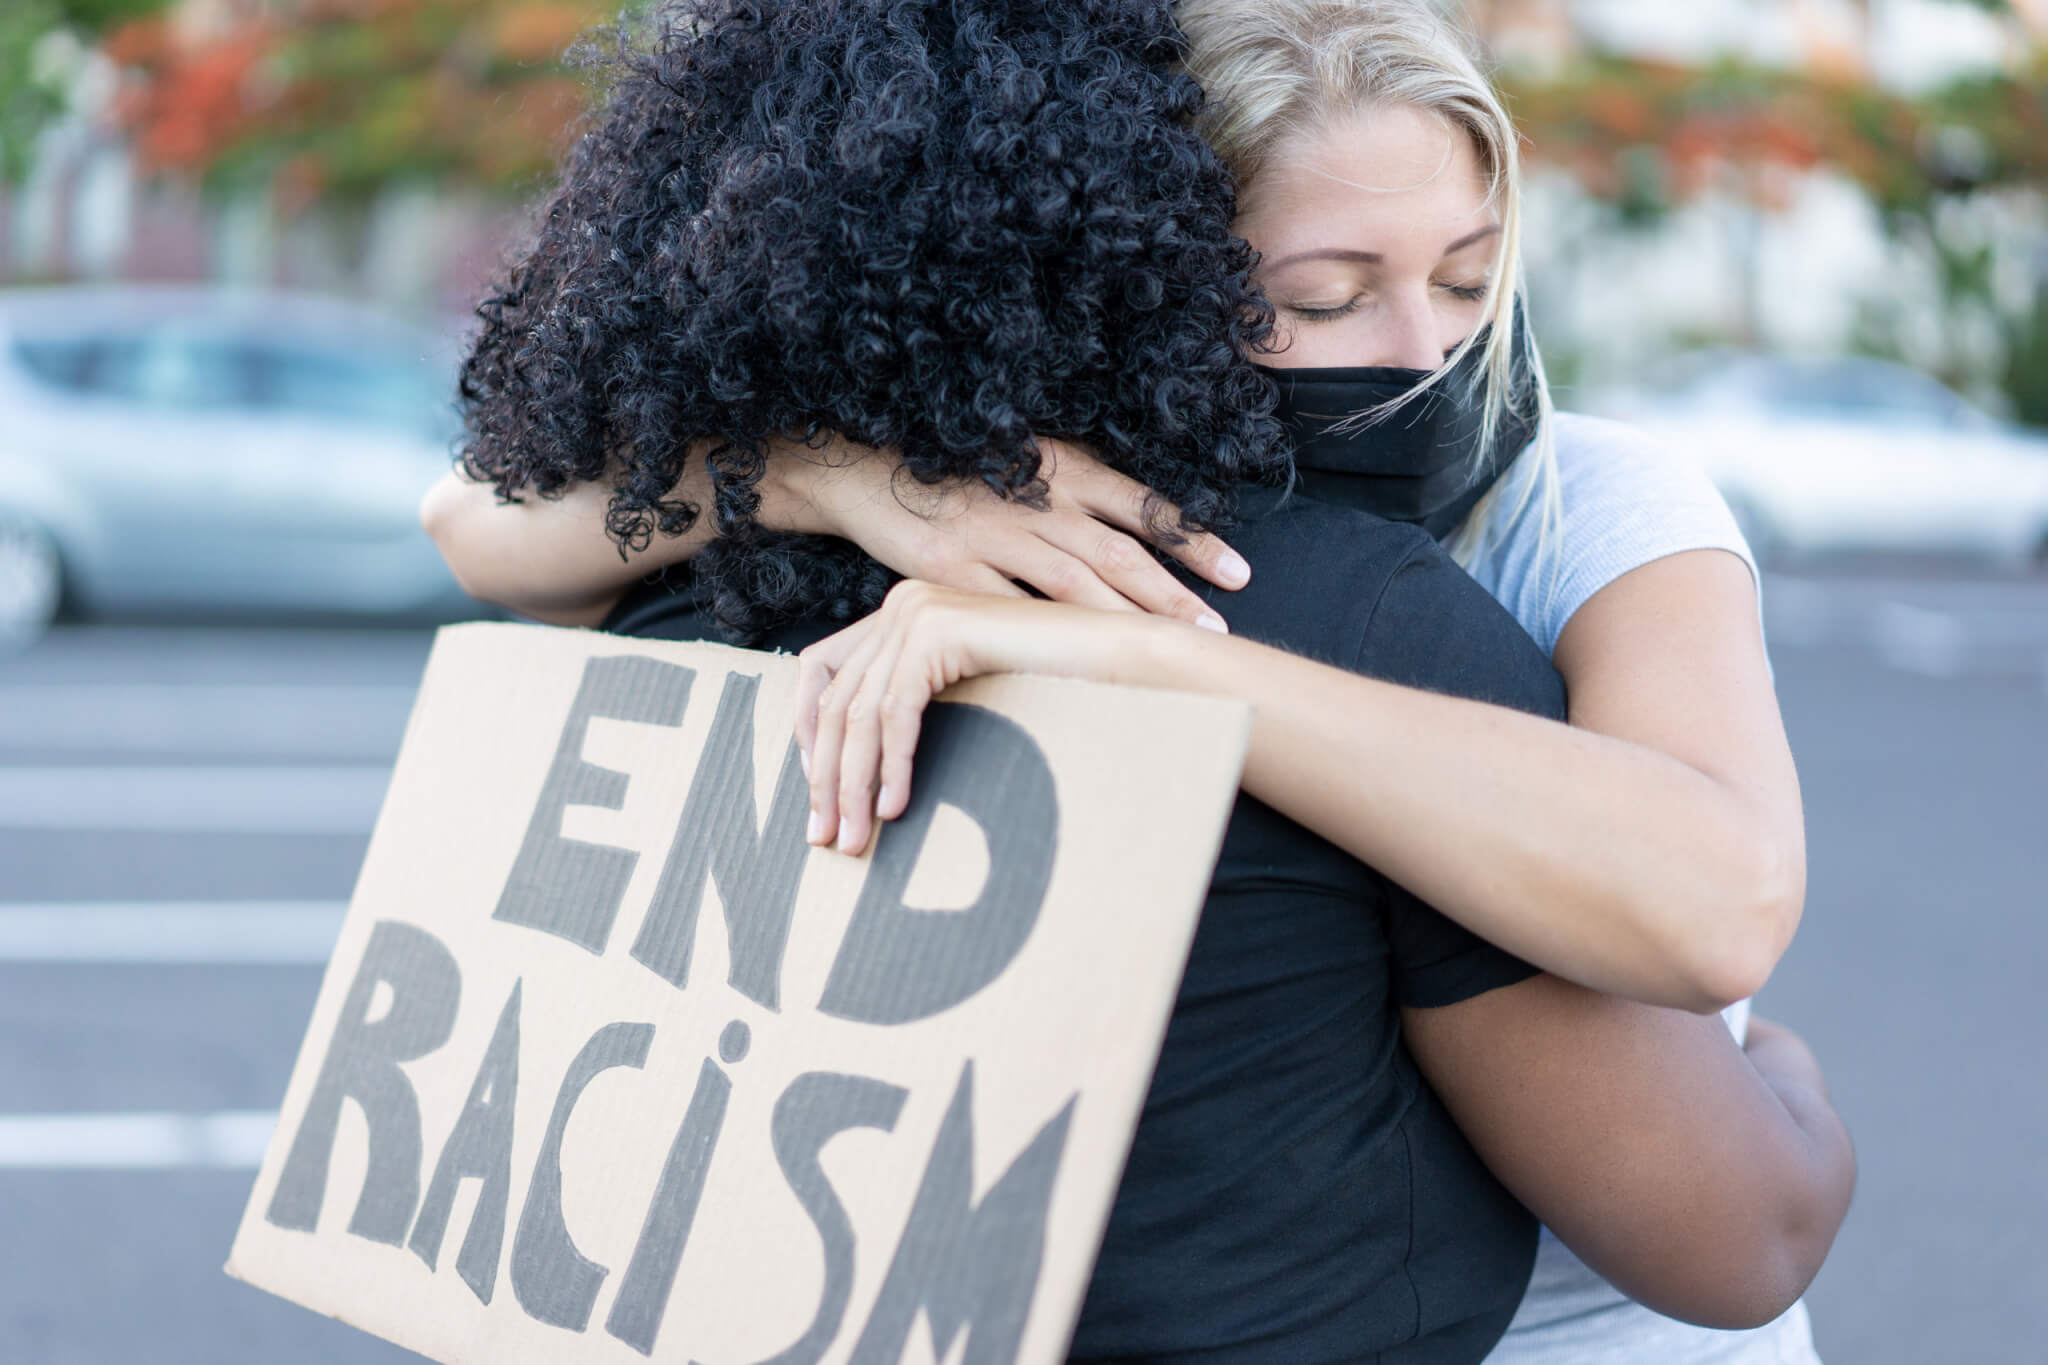 End racism: Black woman hugging a White woman at civil rights protest